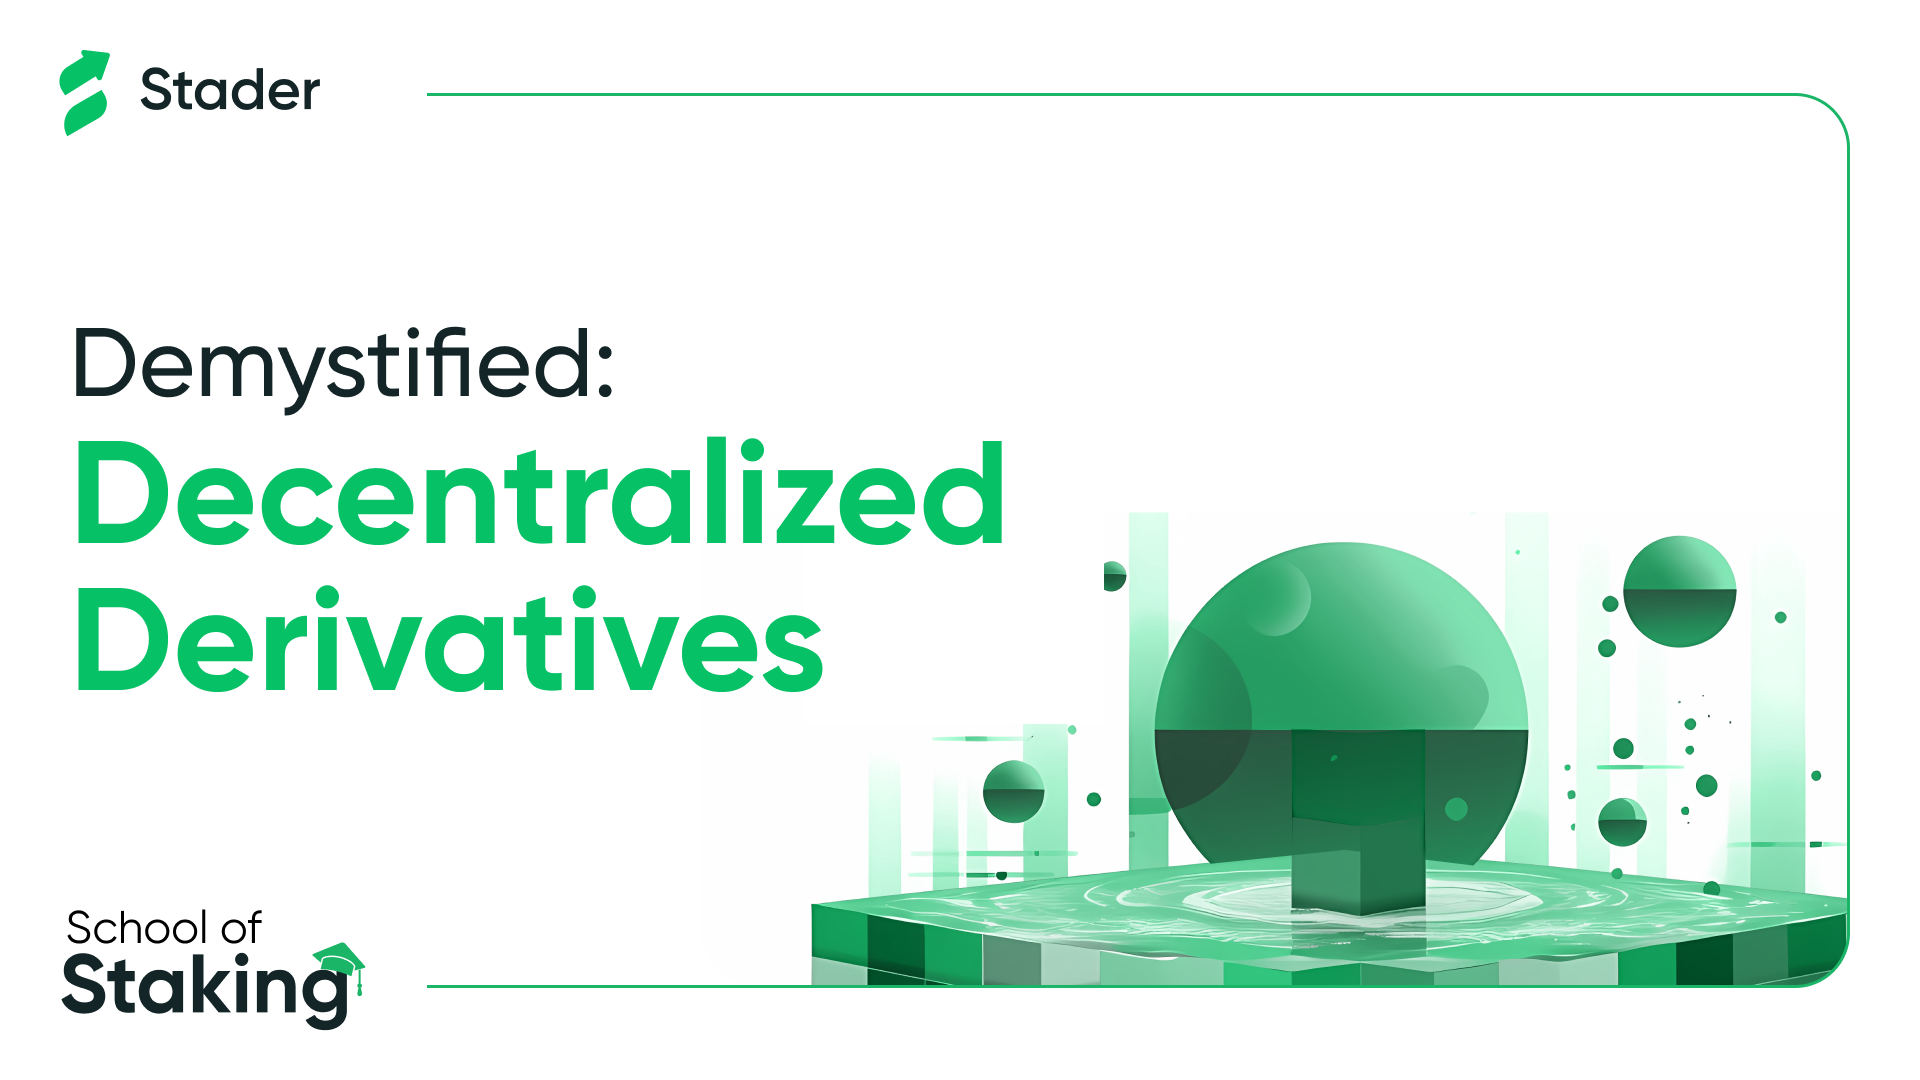 What are decentralised derivatives?